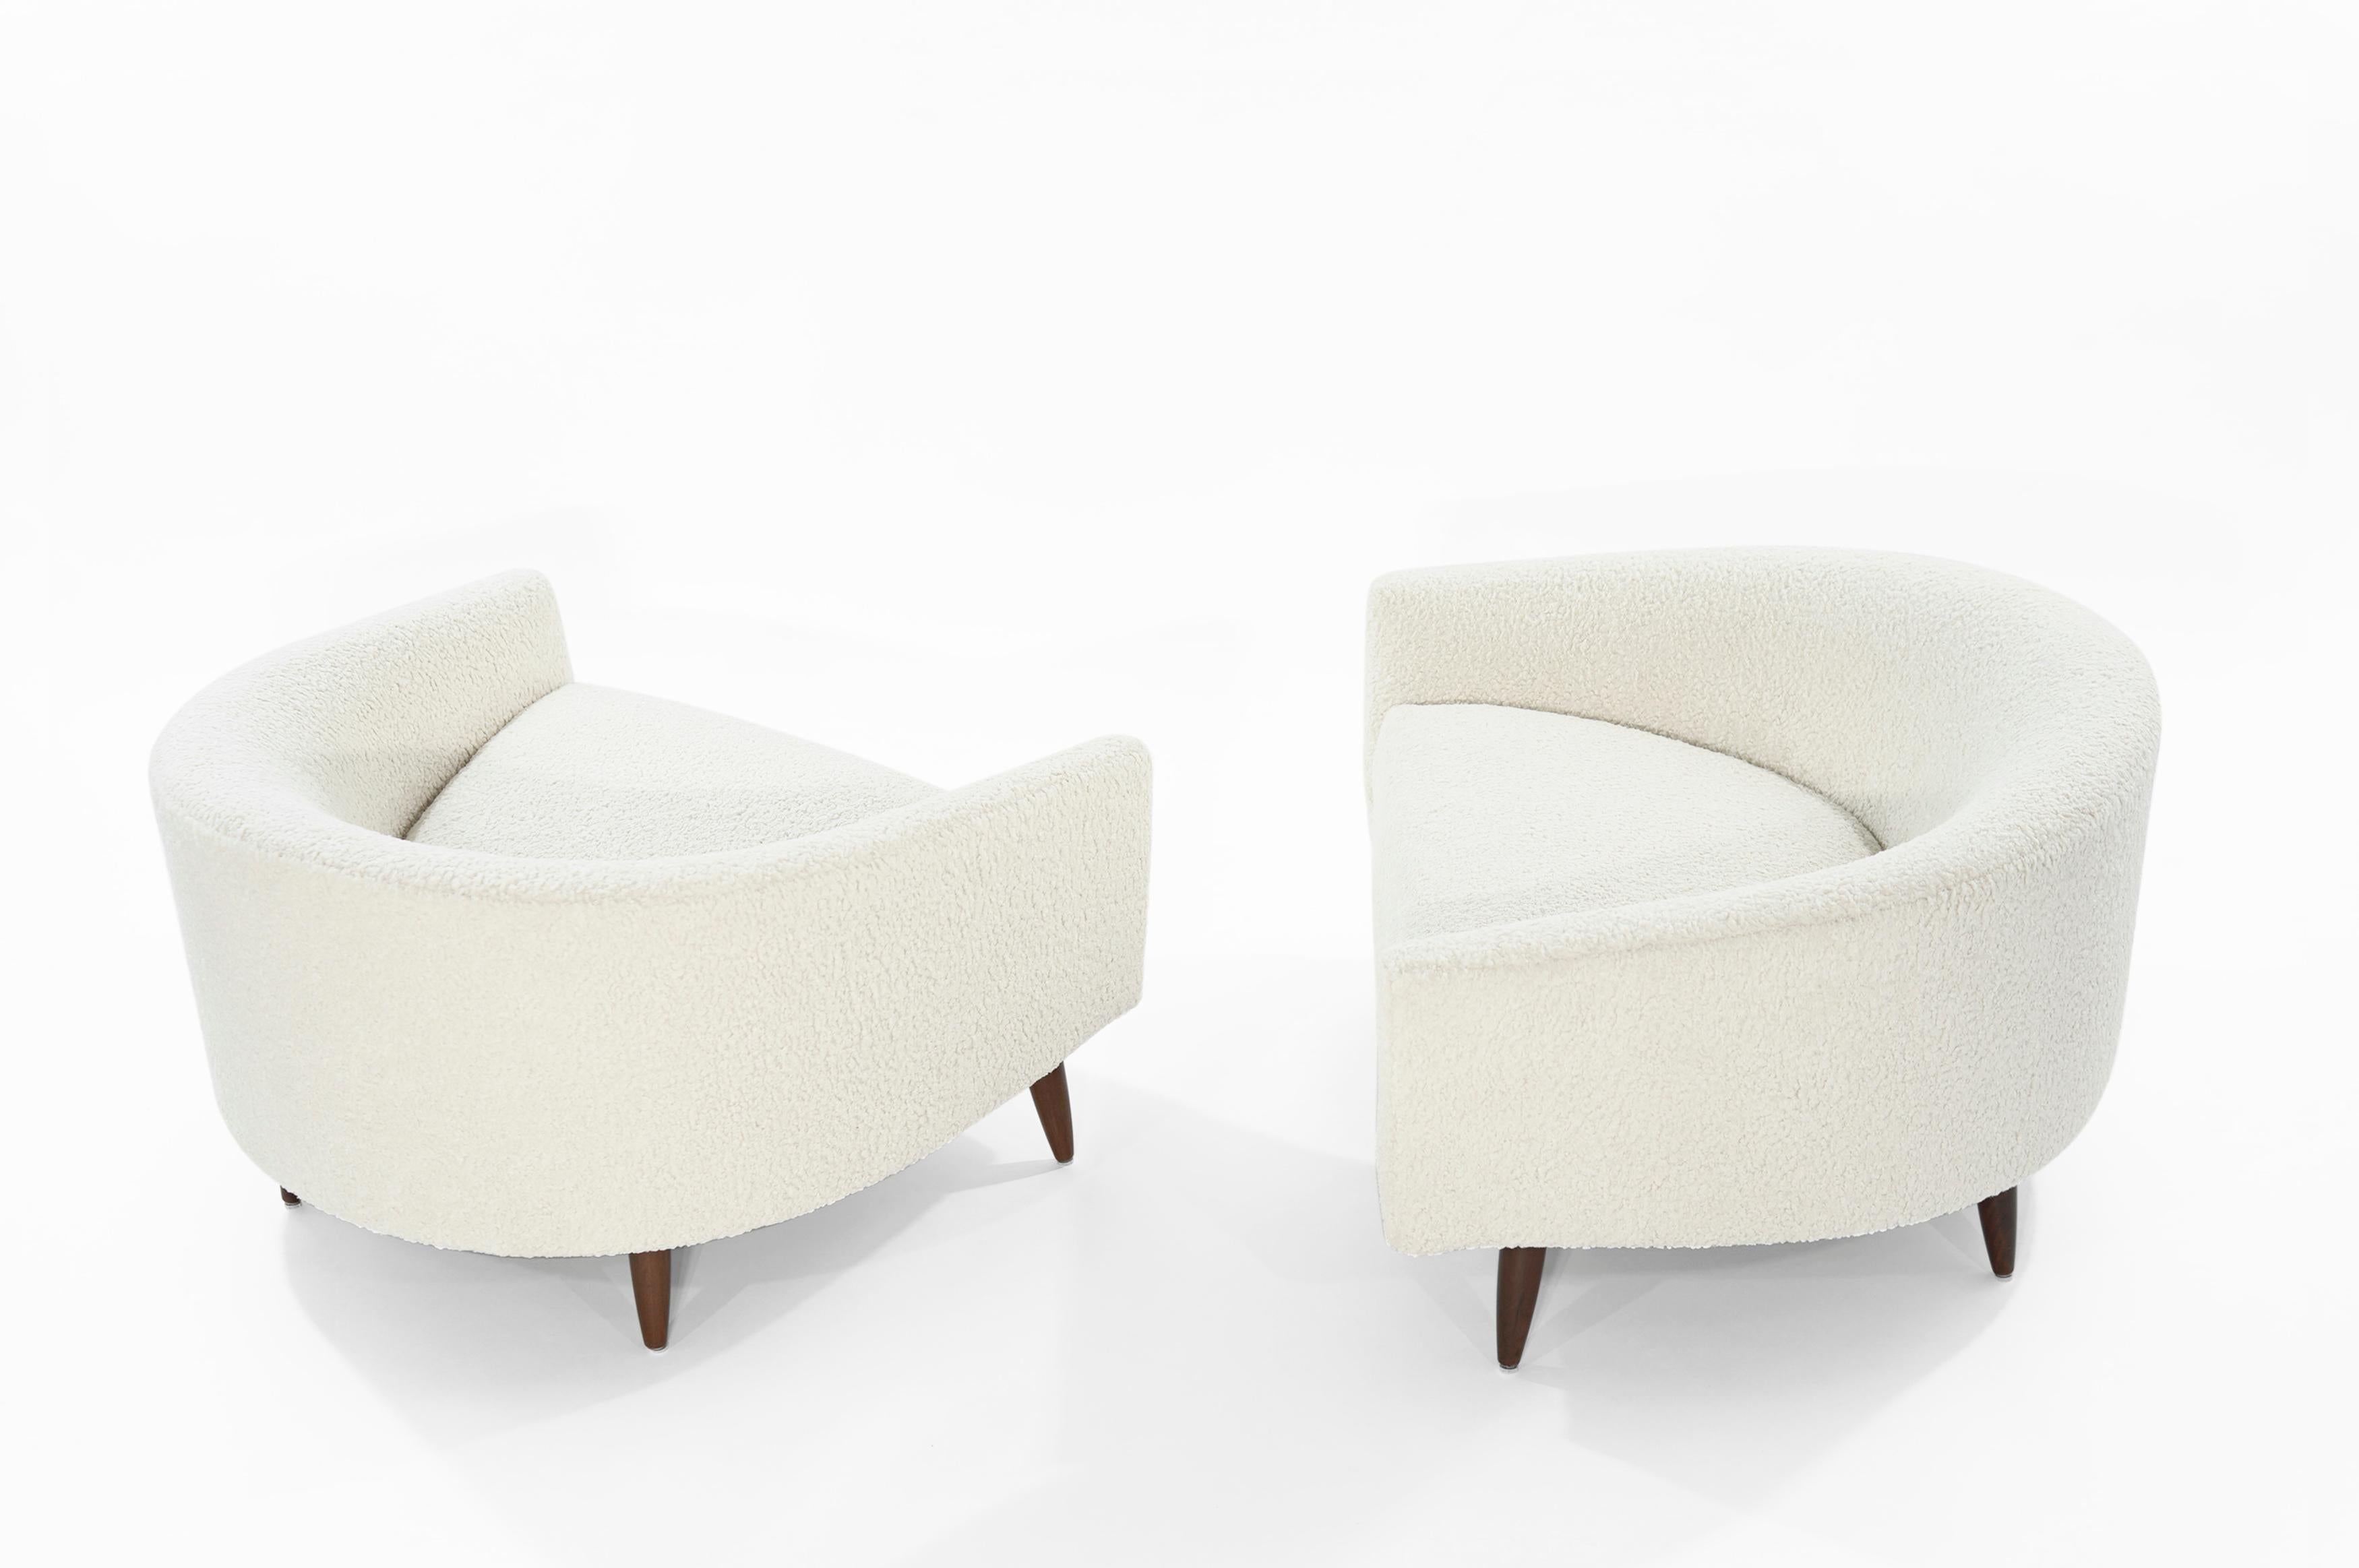 Rare pair of low and wide profile, lounge chairs designed by Adrian Pearsall for Craft Associates. Extremely comfortable! Perhaps one of Adrian's best designs.

Newly upholstered in off-white bouclé by Kravet. Walnut legs fully restored.
   